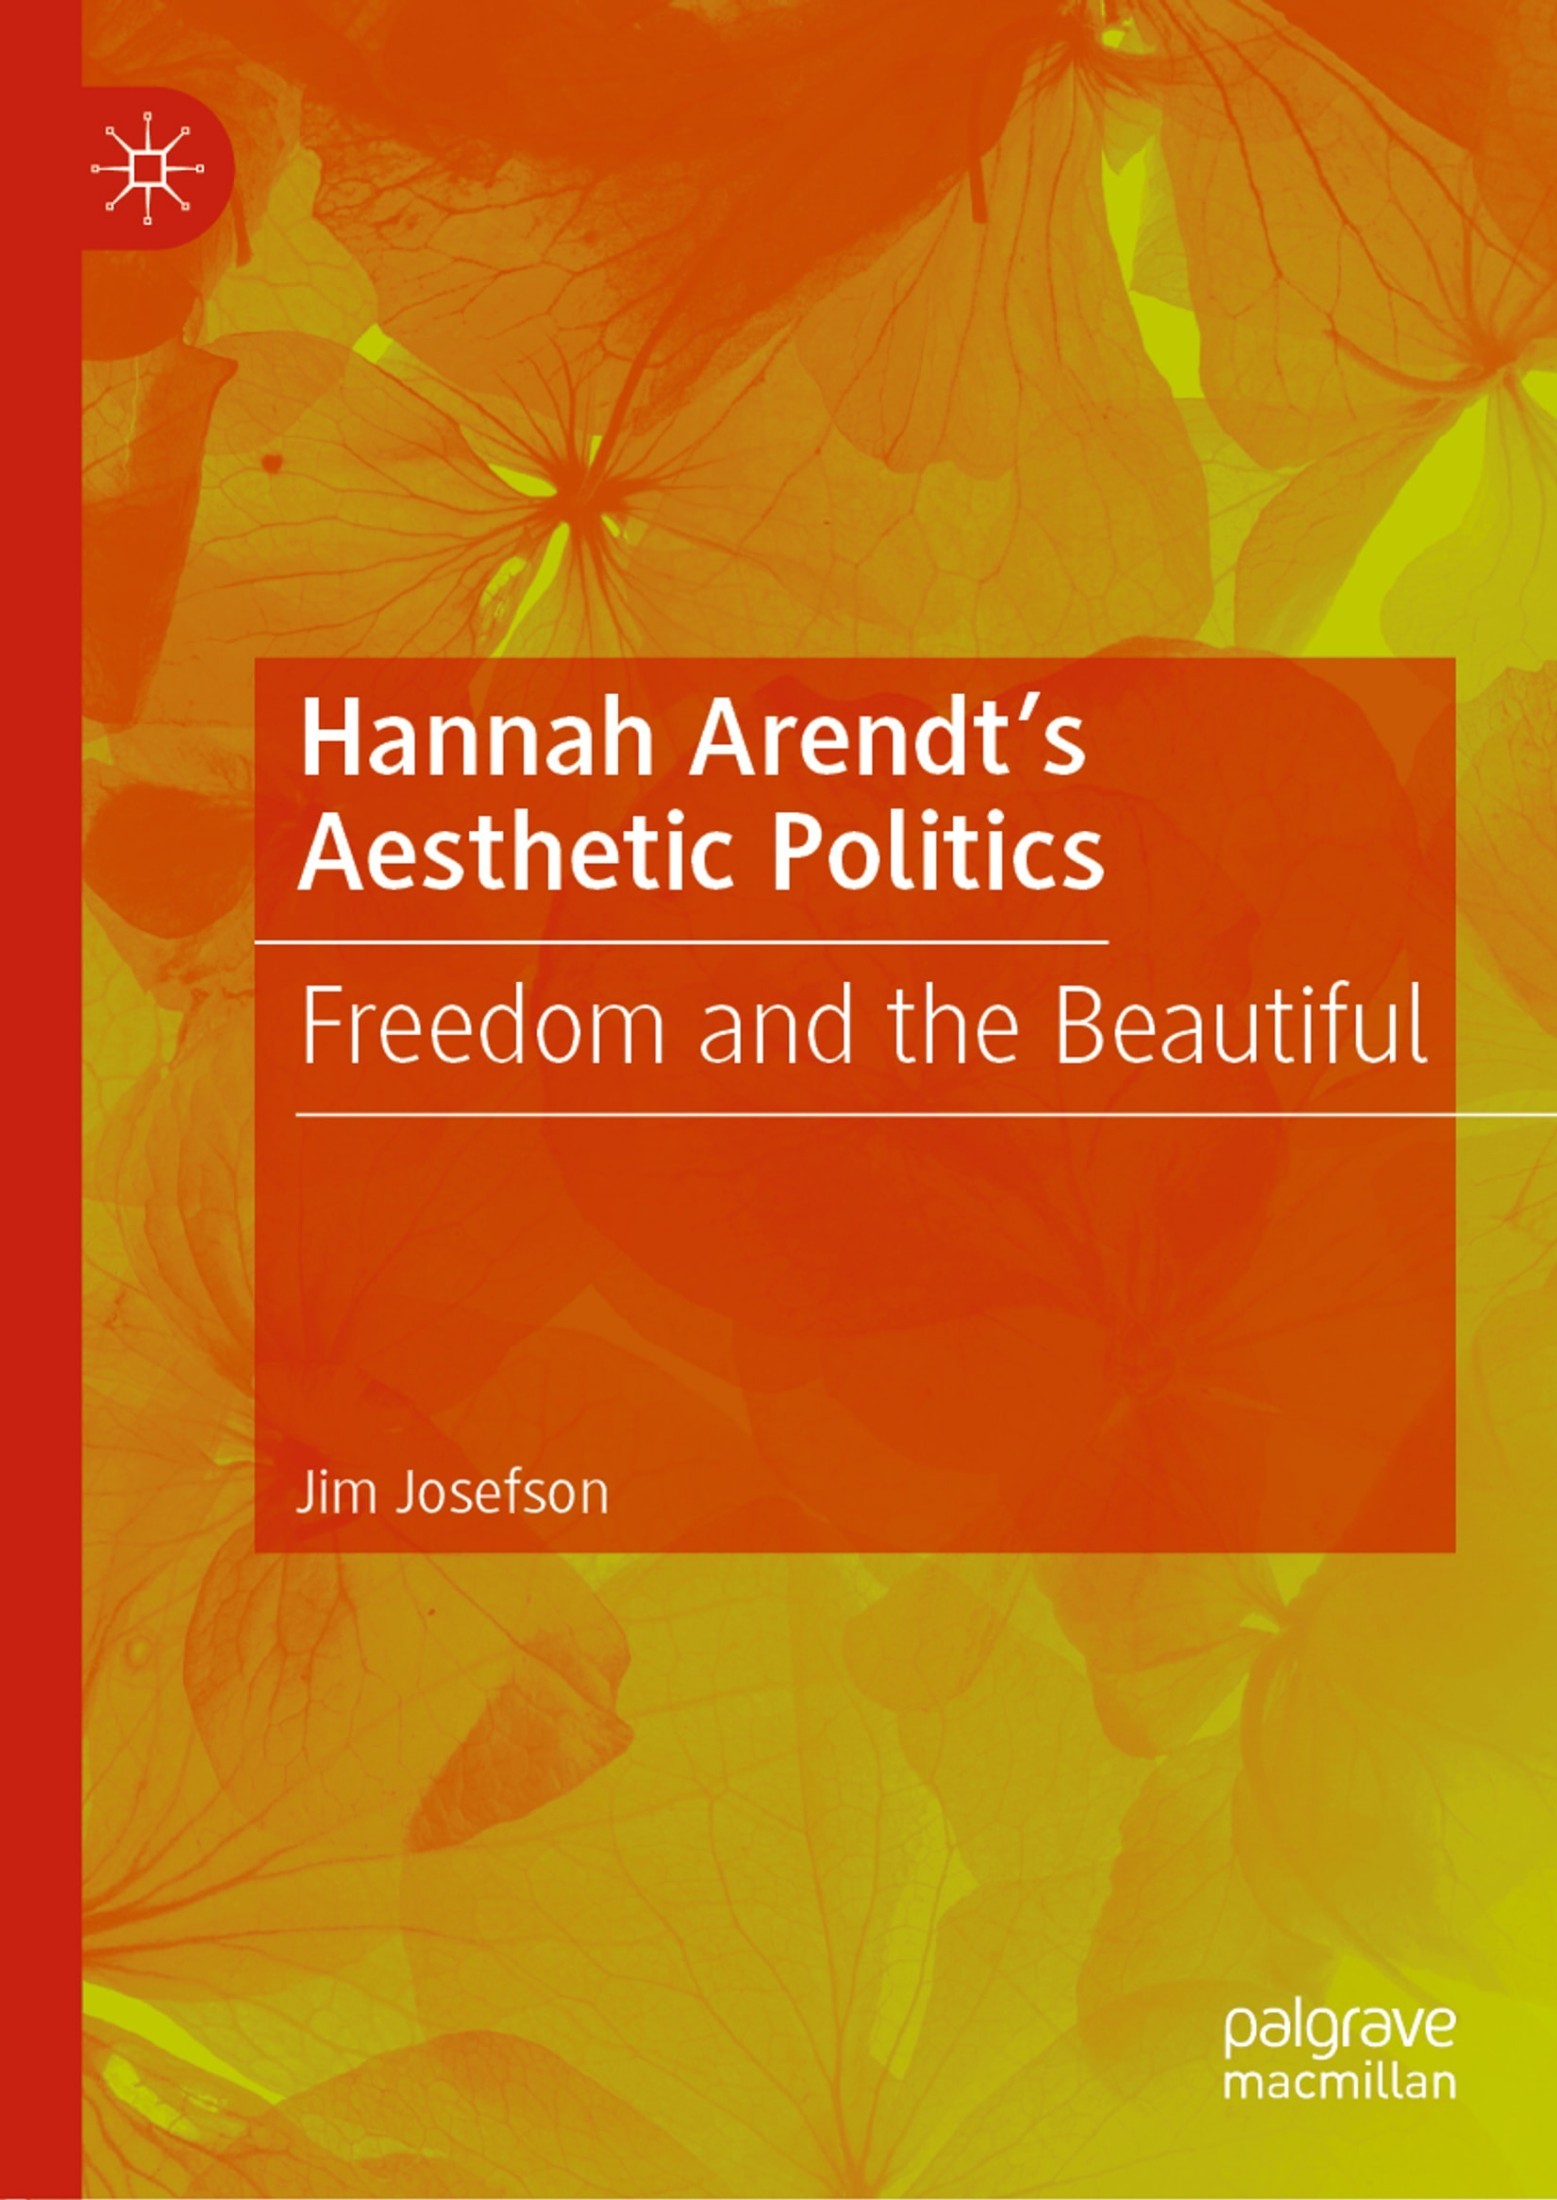 Hannah Arendt’s Aesthetic Politics: Freedom and the Beautiful